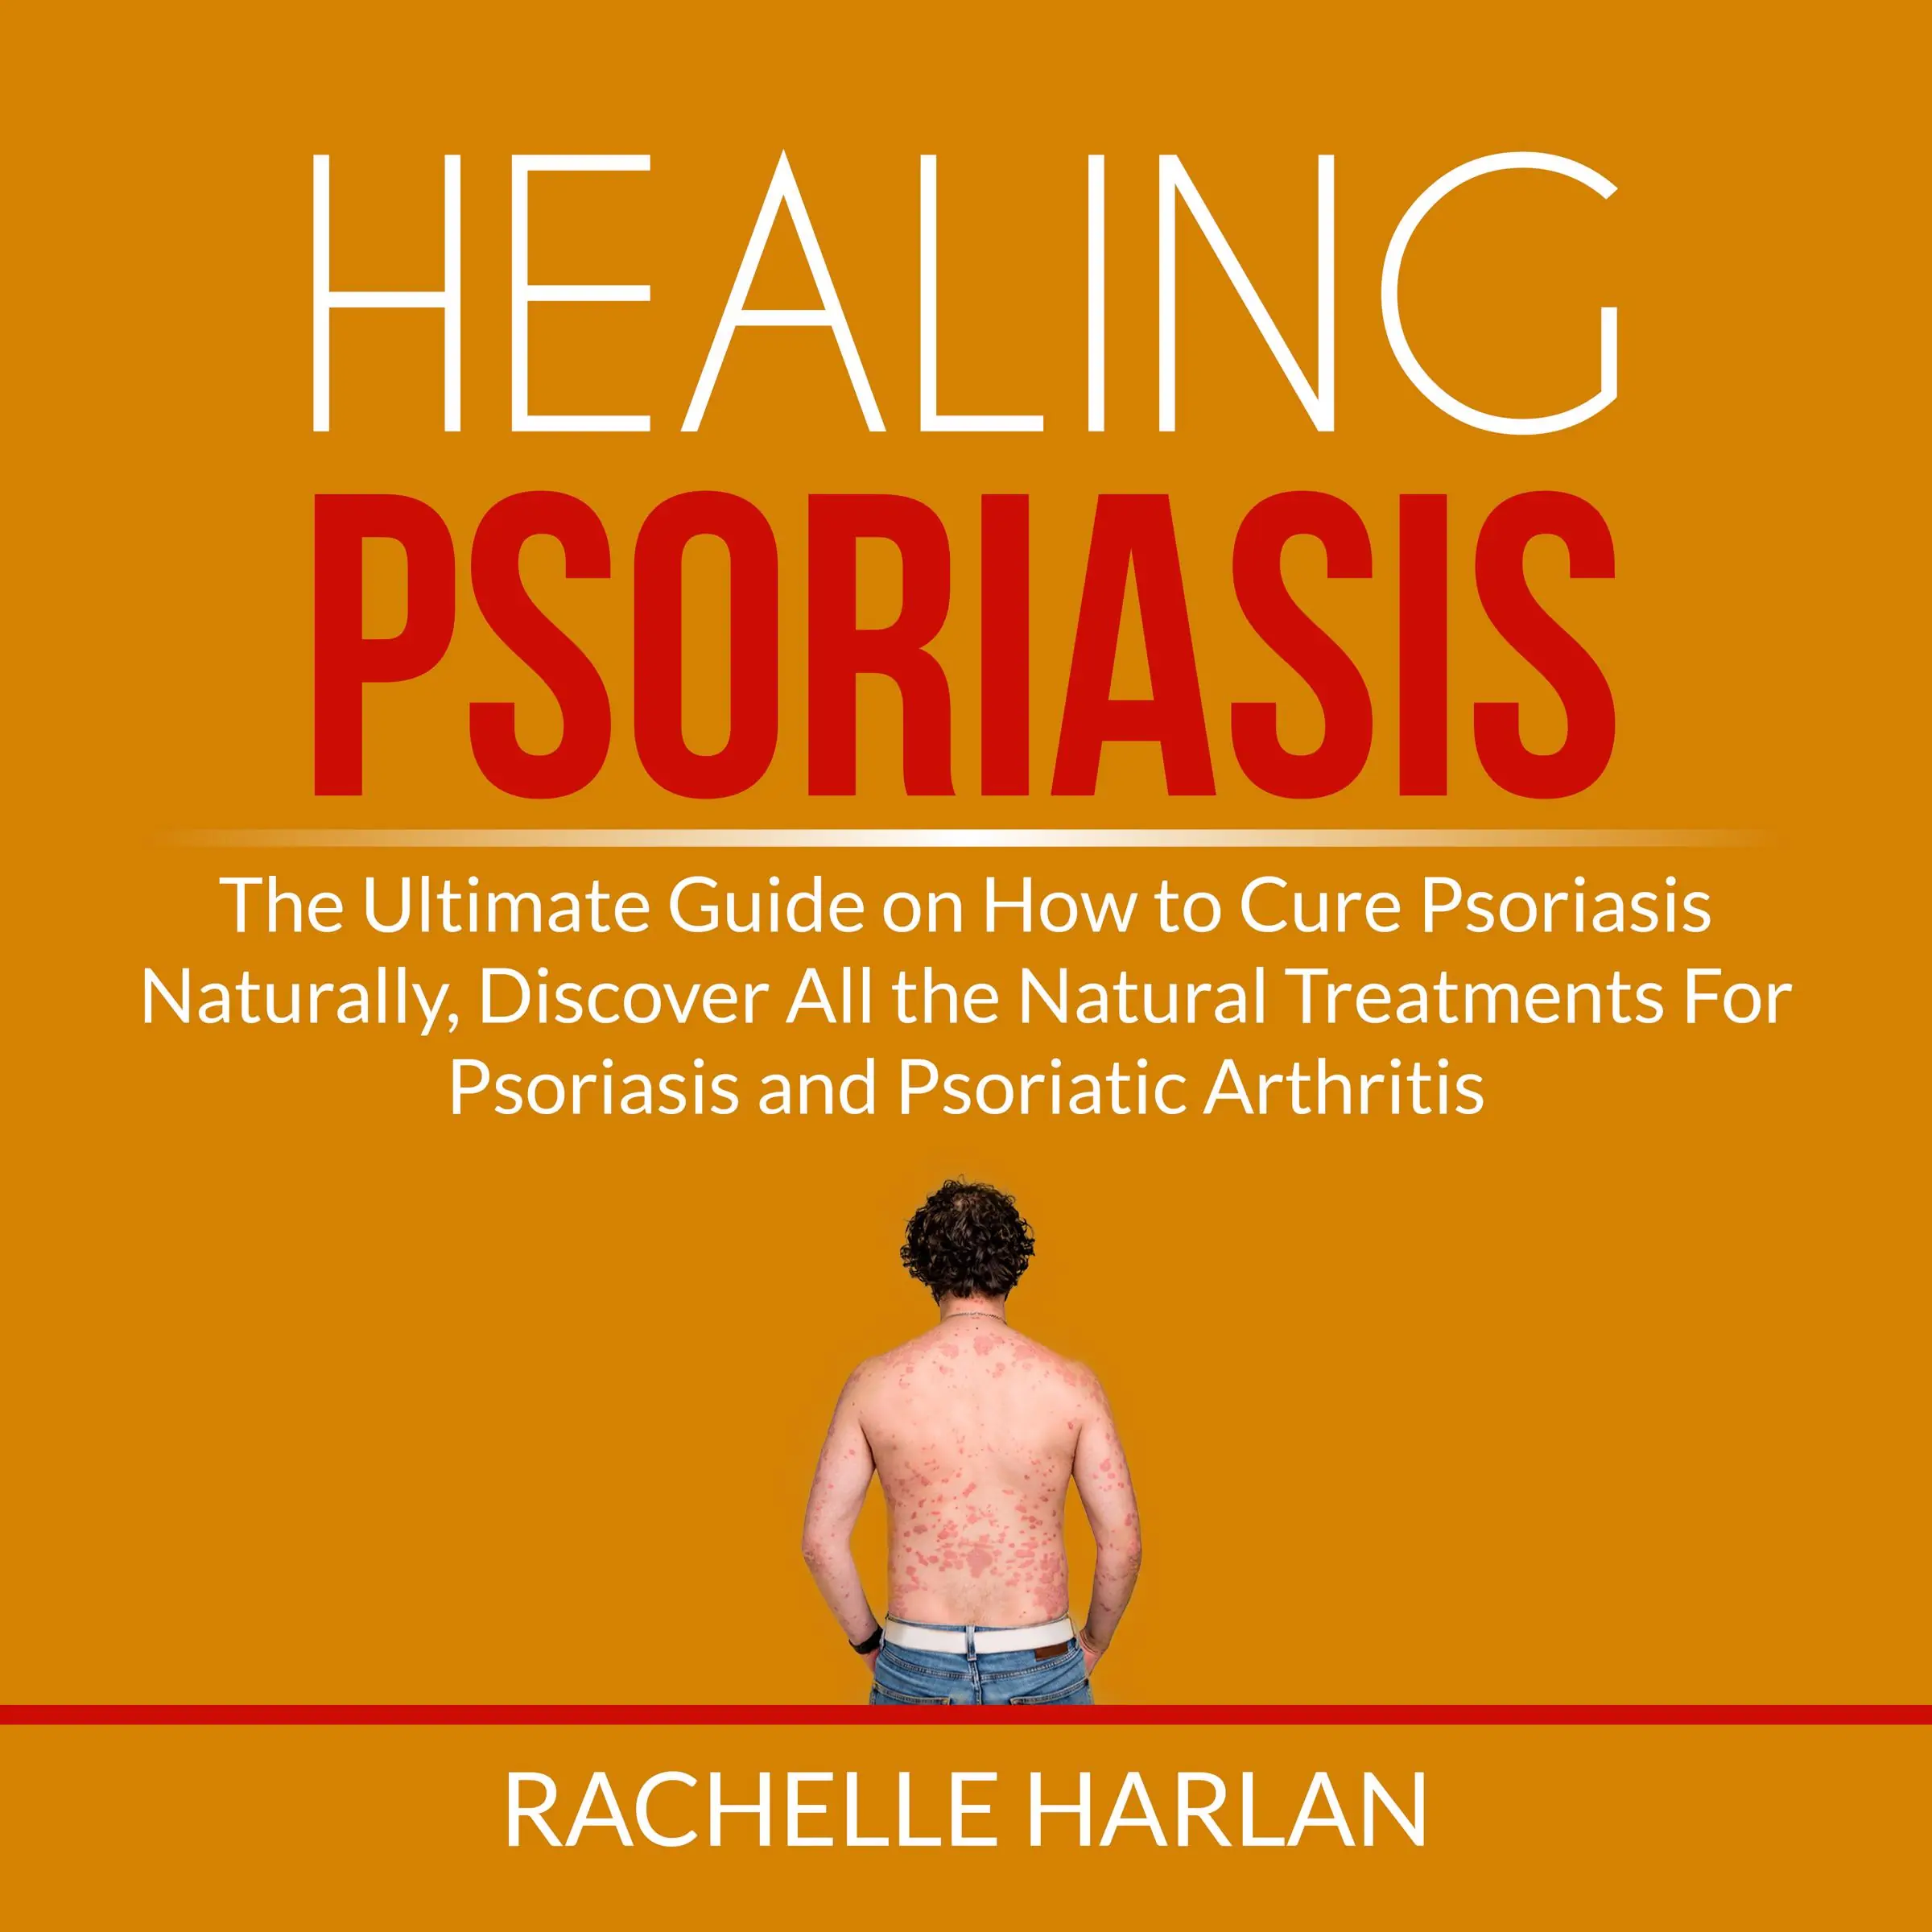 Healing Psoriasis: The Ultimate Guide on How to Cure Psoriasis Naturally, Discover All the Natural Treatments For Psoriasis and Psoriatic Arthritis by Rachelle Harlan Audiobook